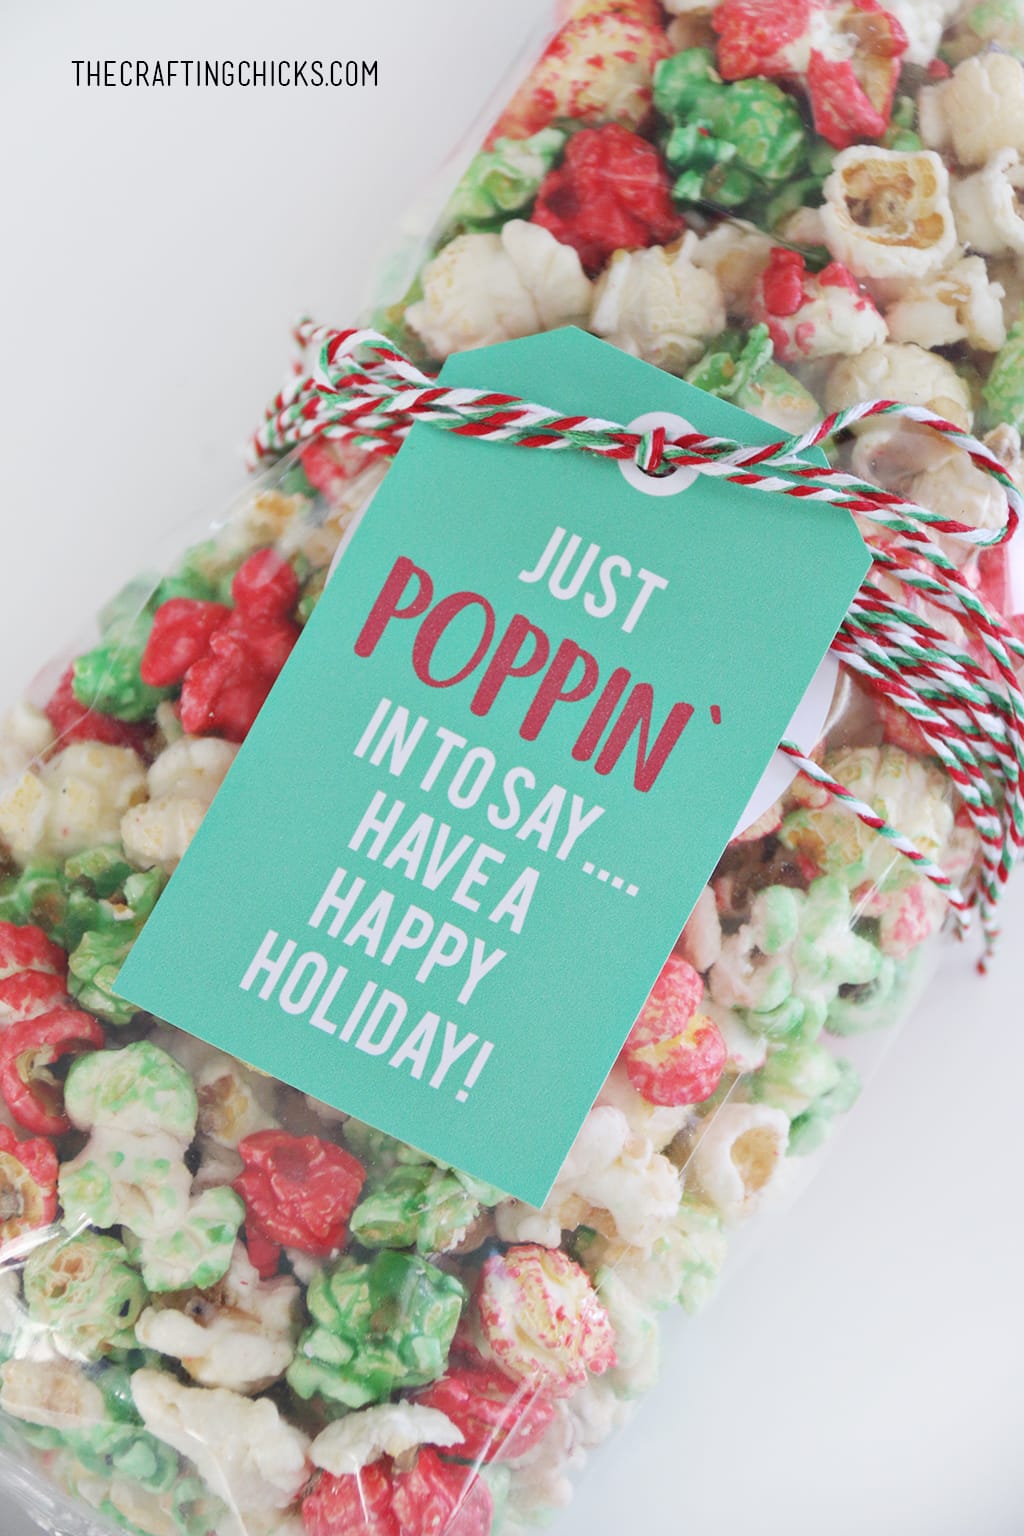 Just Poppin' In Christmas Popcorn Tag added to red, green, and white popcorn for a holiday gift idea.